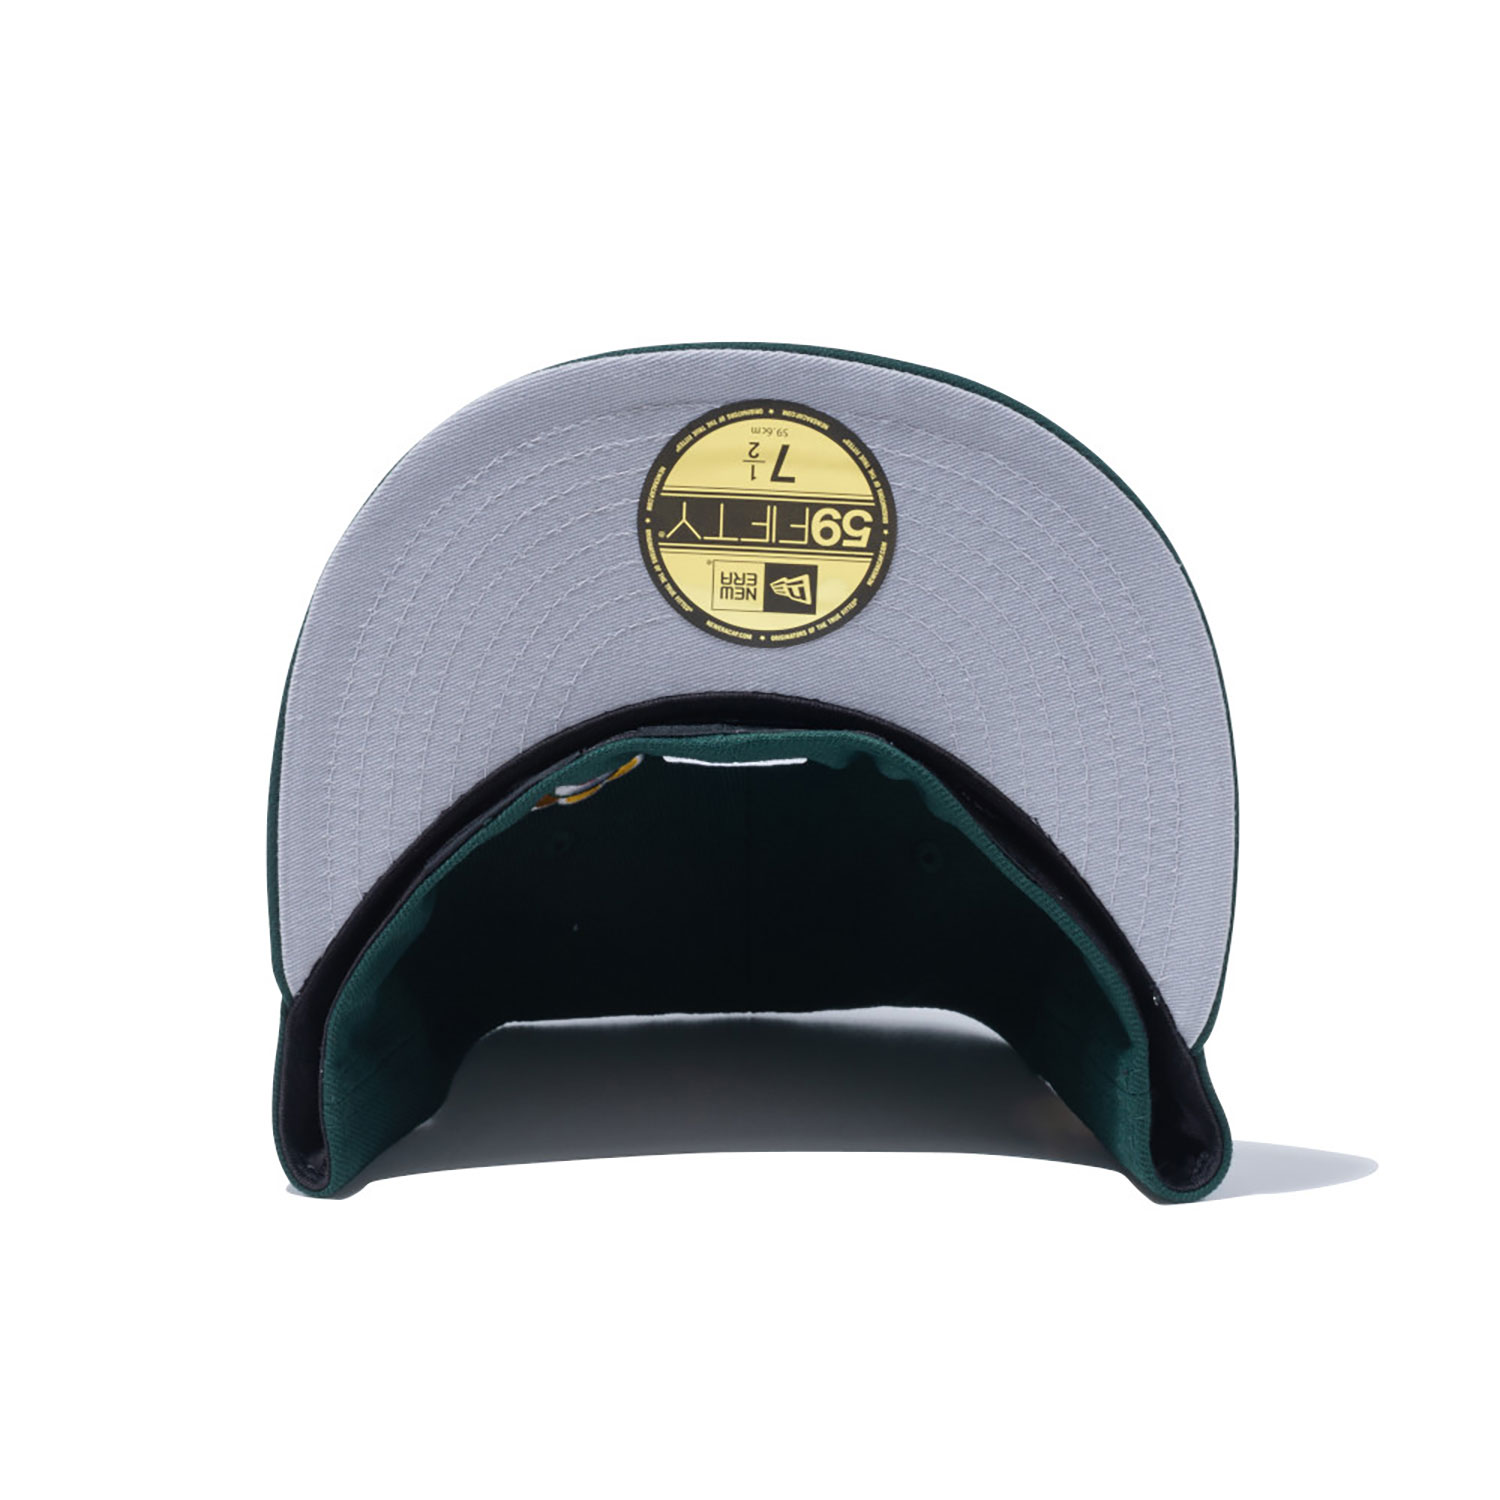 Oakland Athletics Flower Embroidery New Era Japan Dark Green 59FIFTY Fitted Cap